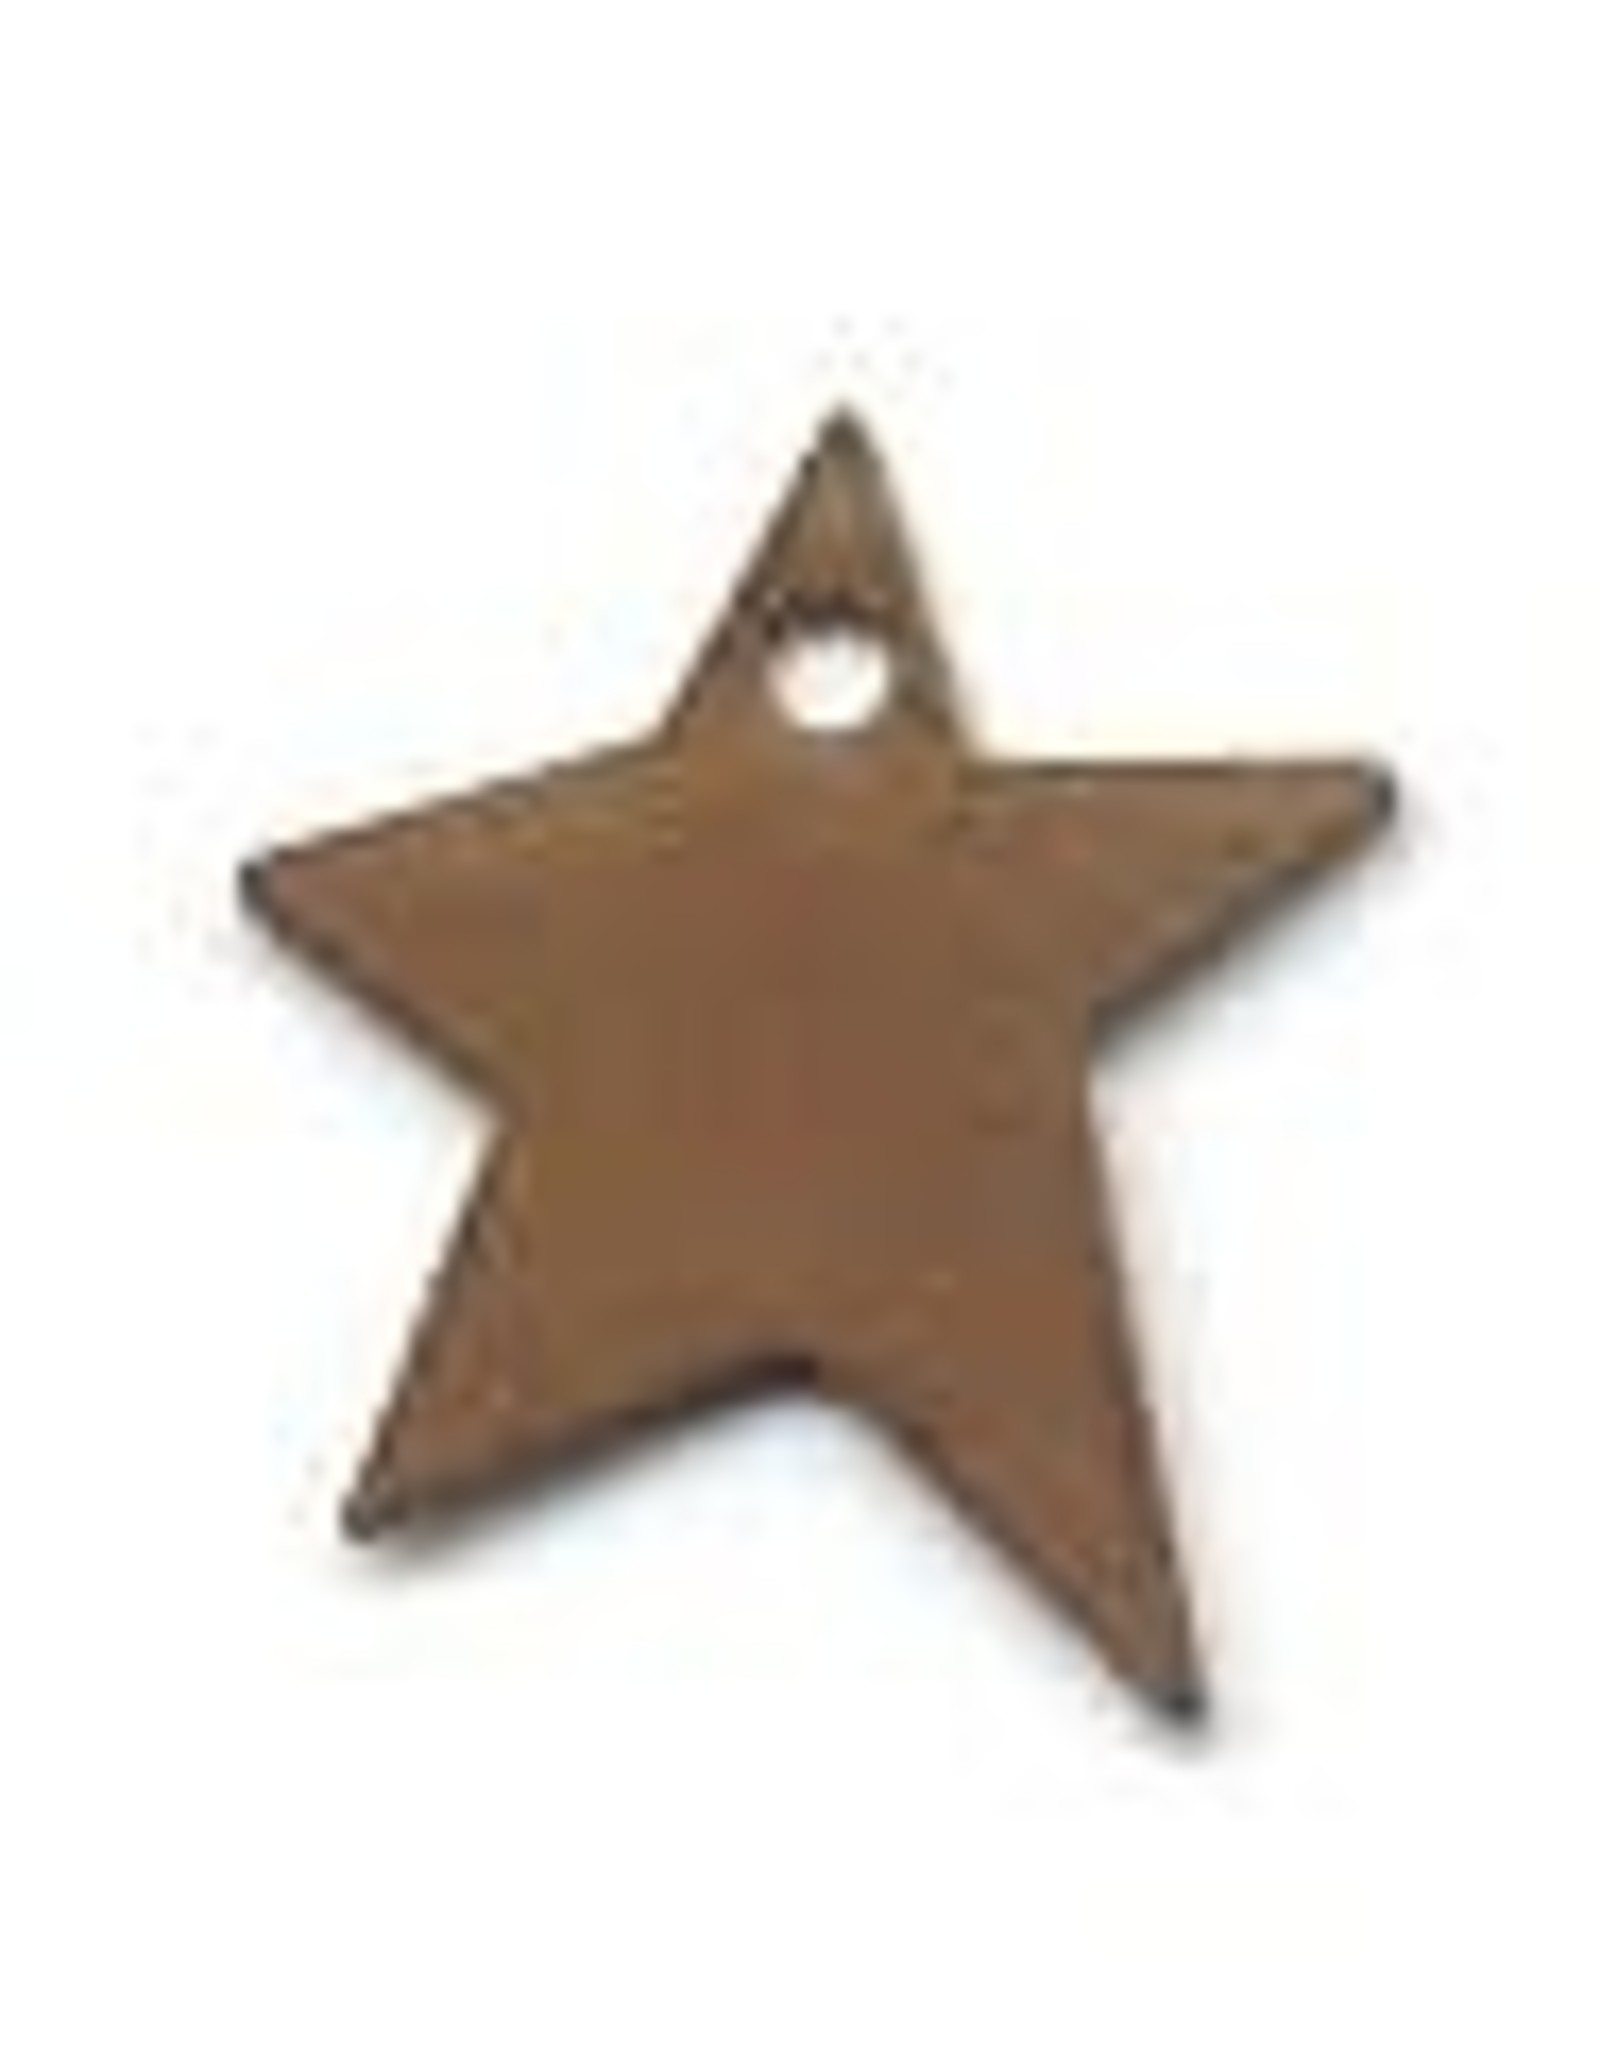 RUSTY TIN STAR 3/4" (WITH HOLE) PACKAGED 12